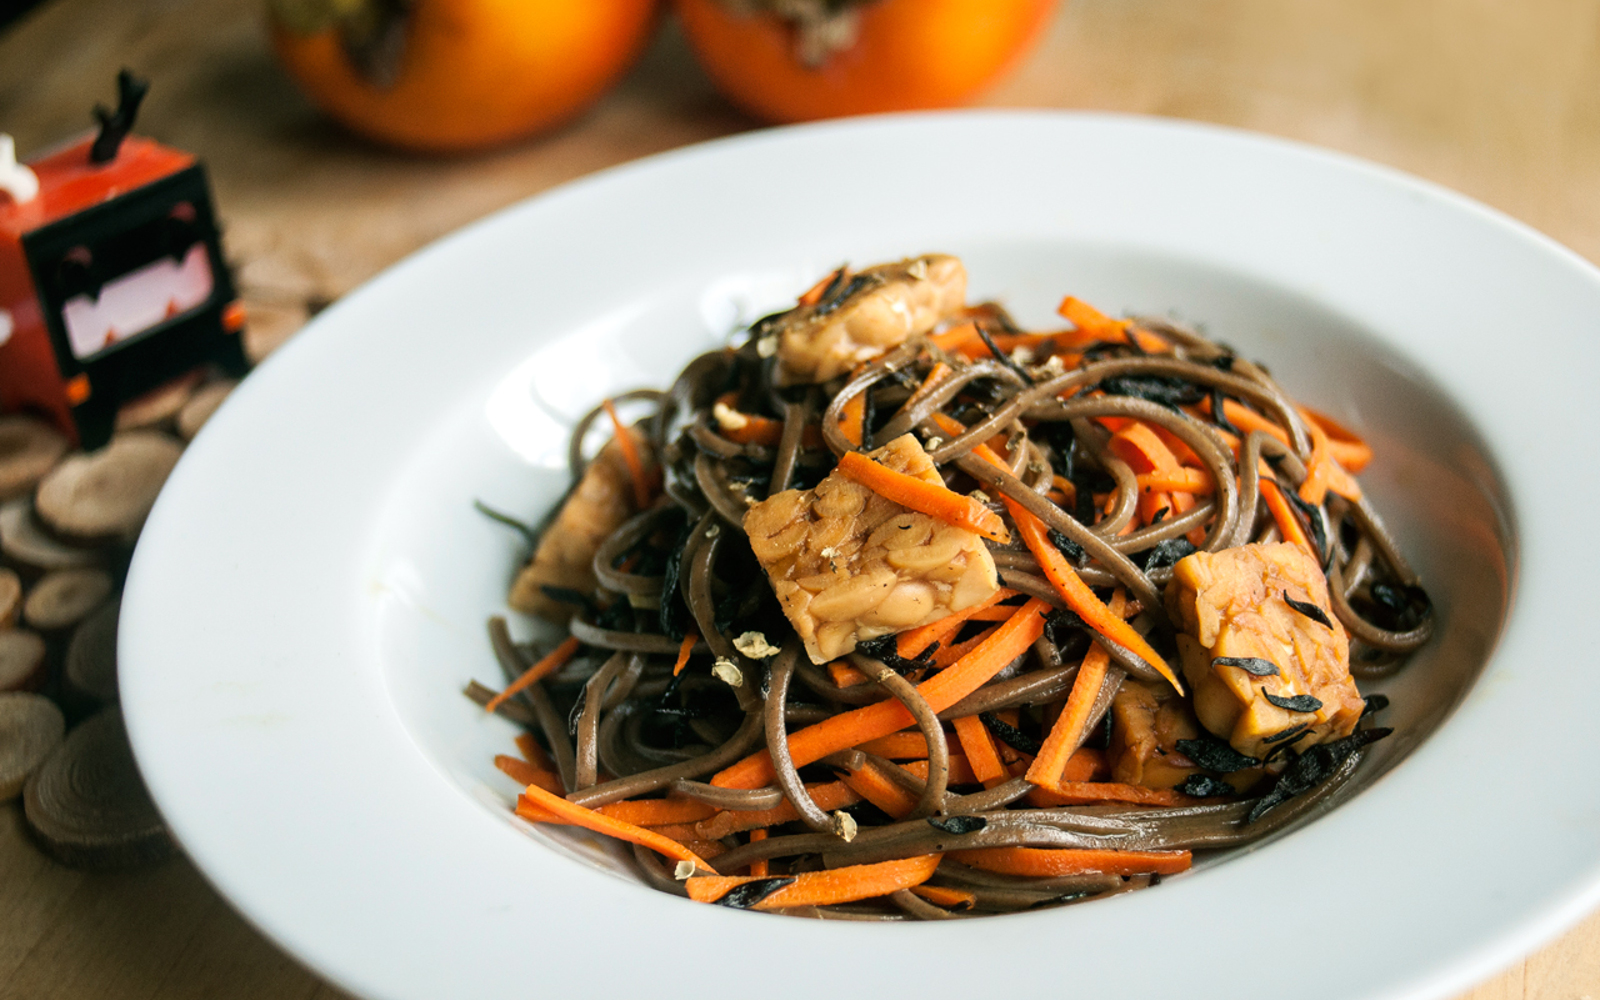 Carrot and Soba Noodles With Sea Vegetables